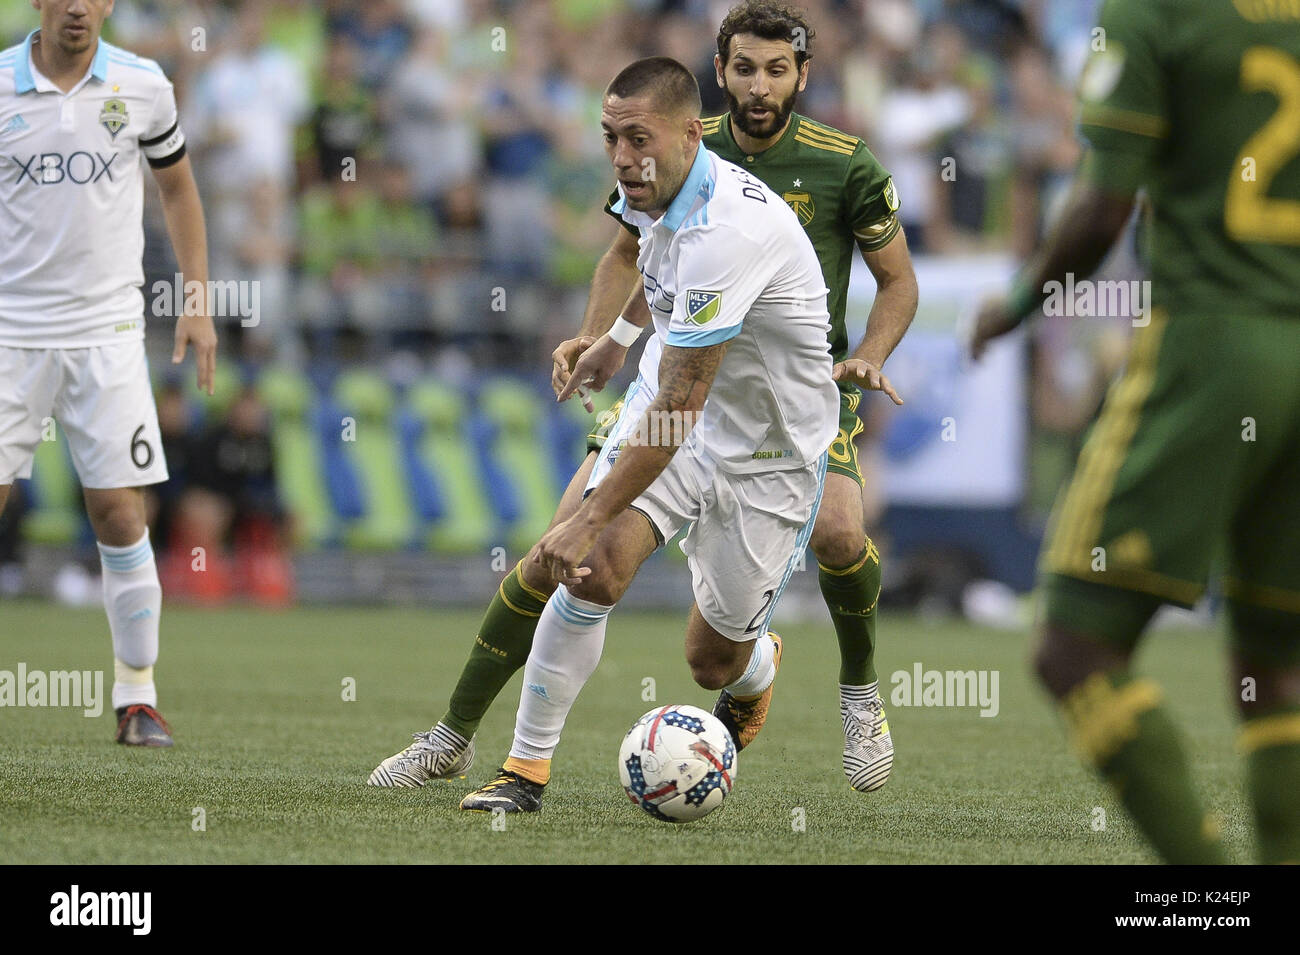 Seattle, Washington, USA. 27th Aug, 2017. Soccer 2017: Seattle Sounders forward CLINT DEMPSEY (2) in action as the Portland Timbers visit the Seattle for an MLS match at Century Link Field in Seattle, WA. Credit: Jeff Halstead/ZUMA Wire/Alamy Live News Stock Photo